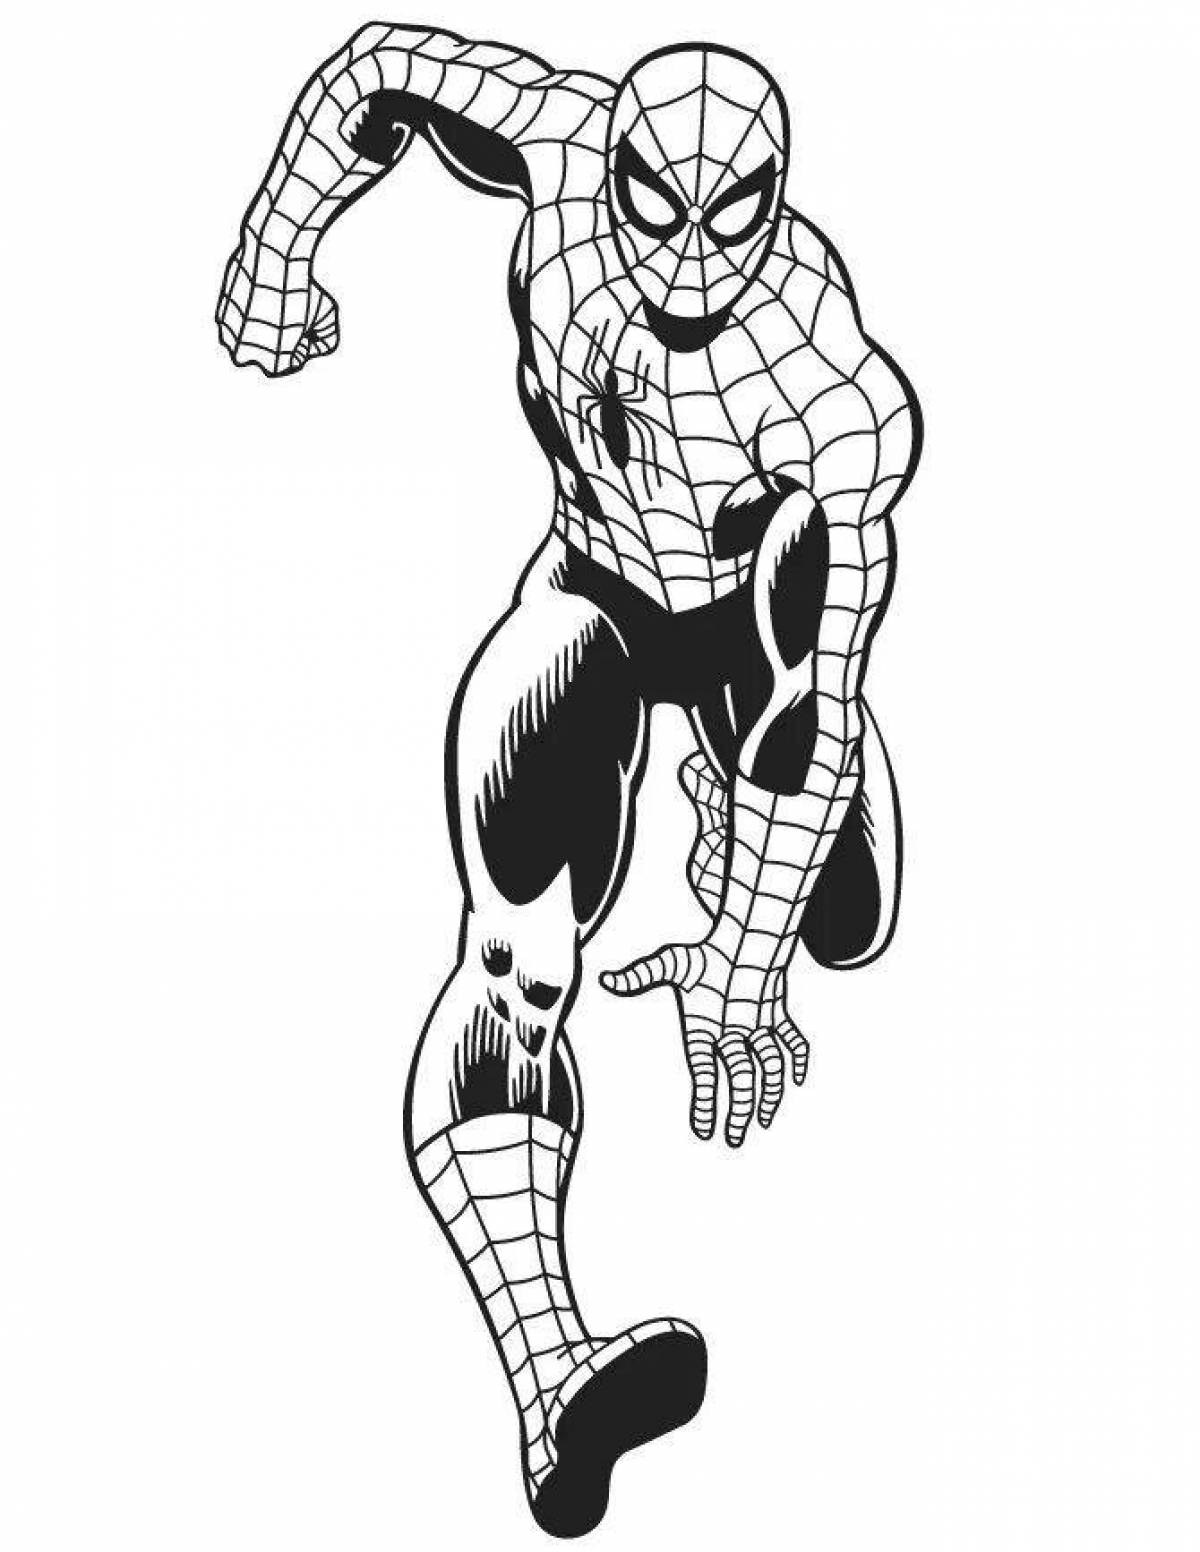 Exquisite marvel spiderman coloring page